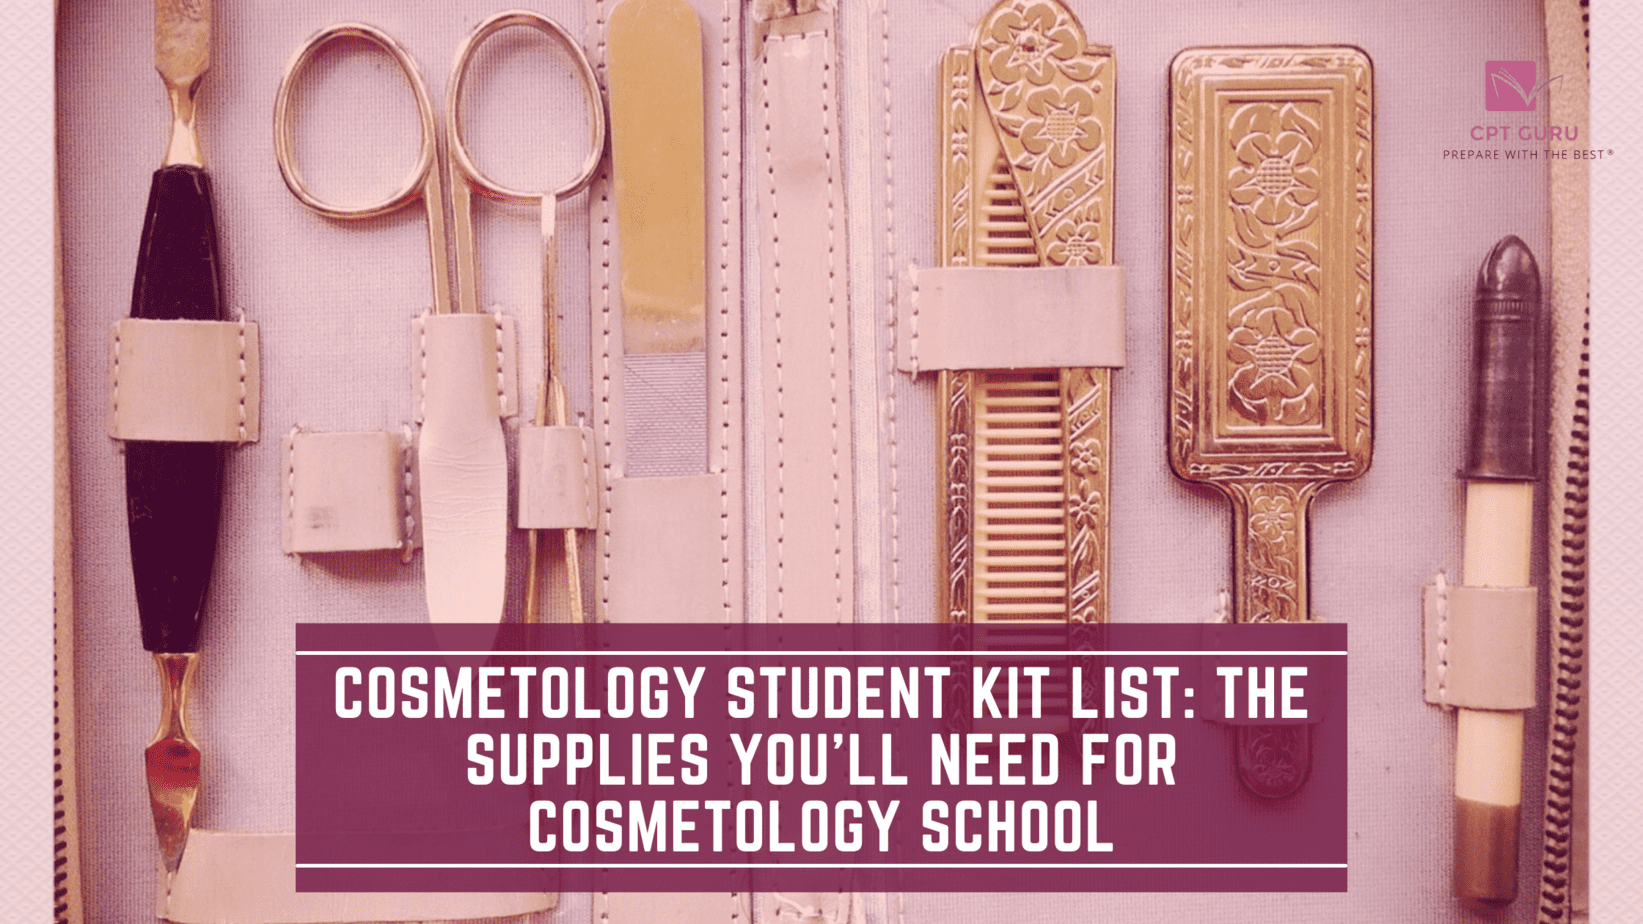 Cosmetology student kit list: The supplies you’ll need for cosmetology school